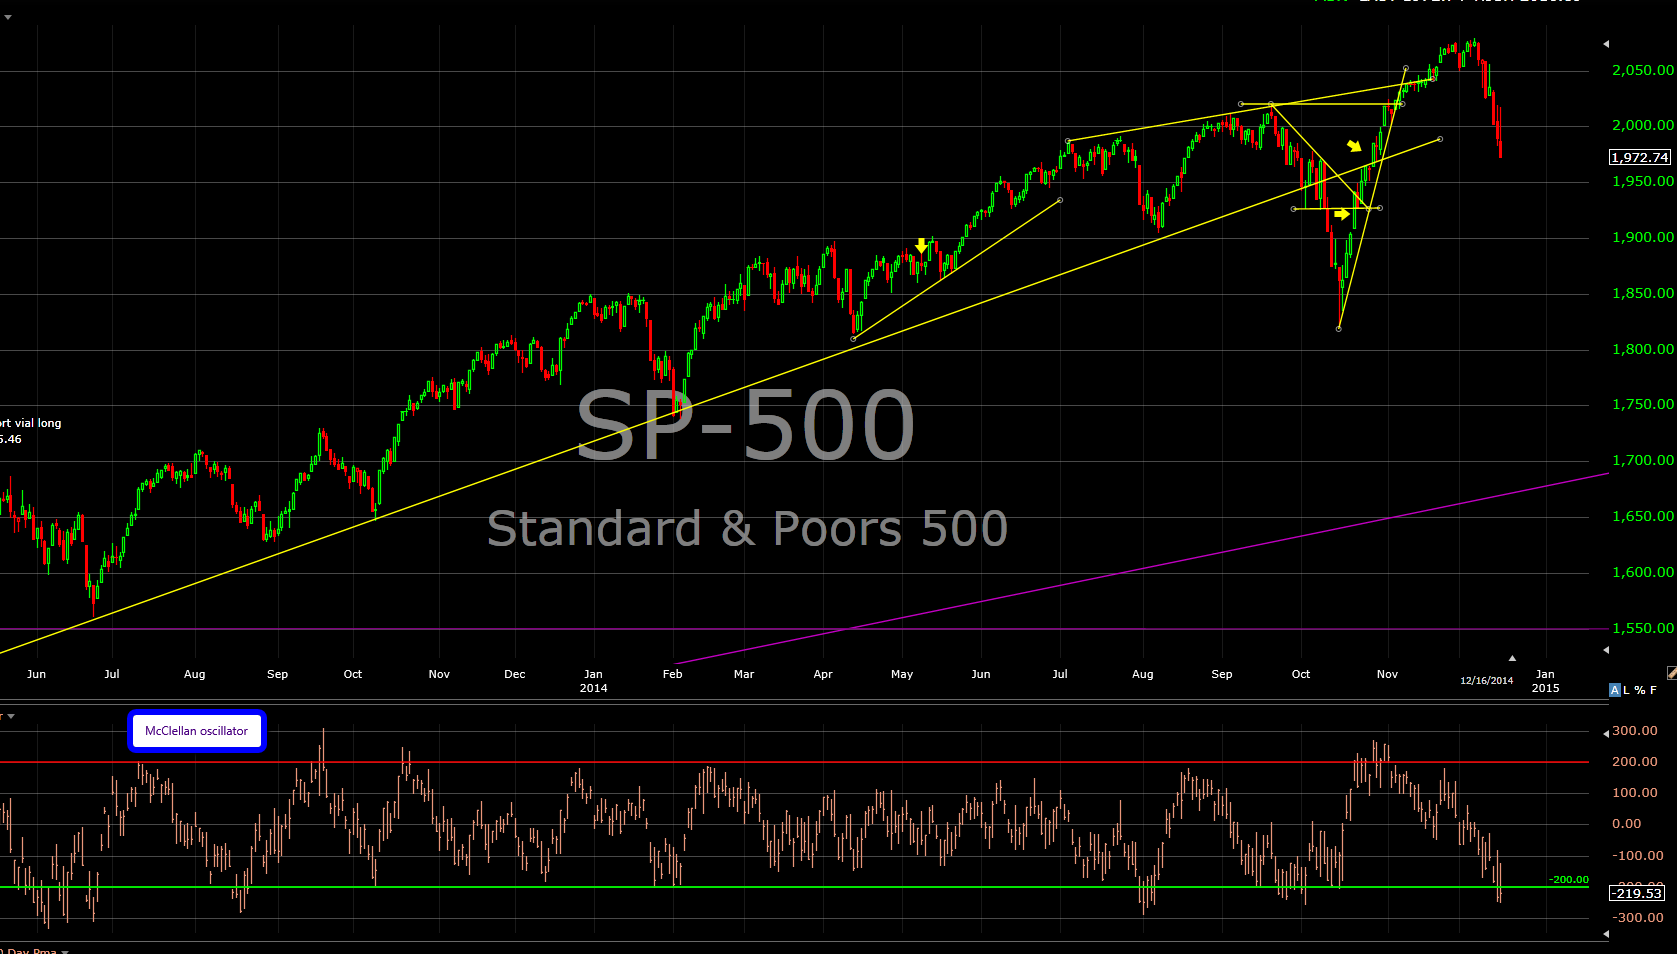 S&P 500 Chart June 2013 to Present